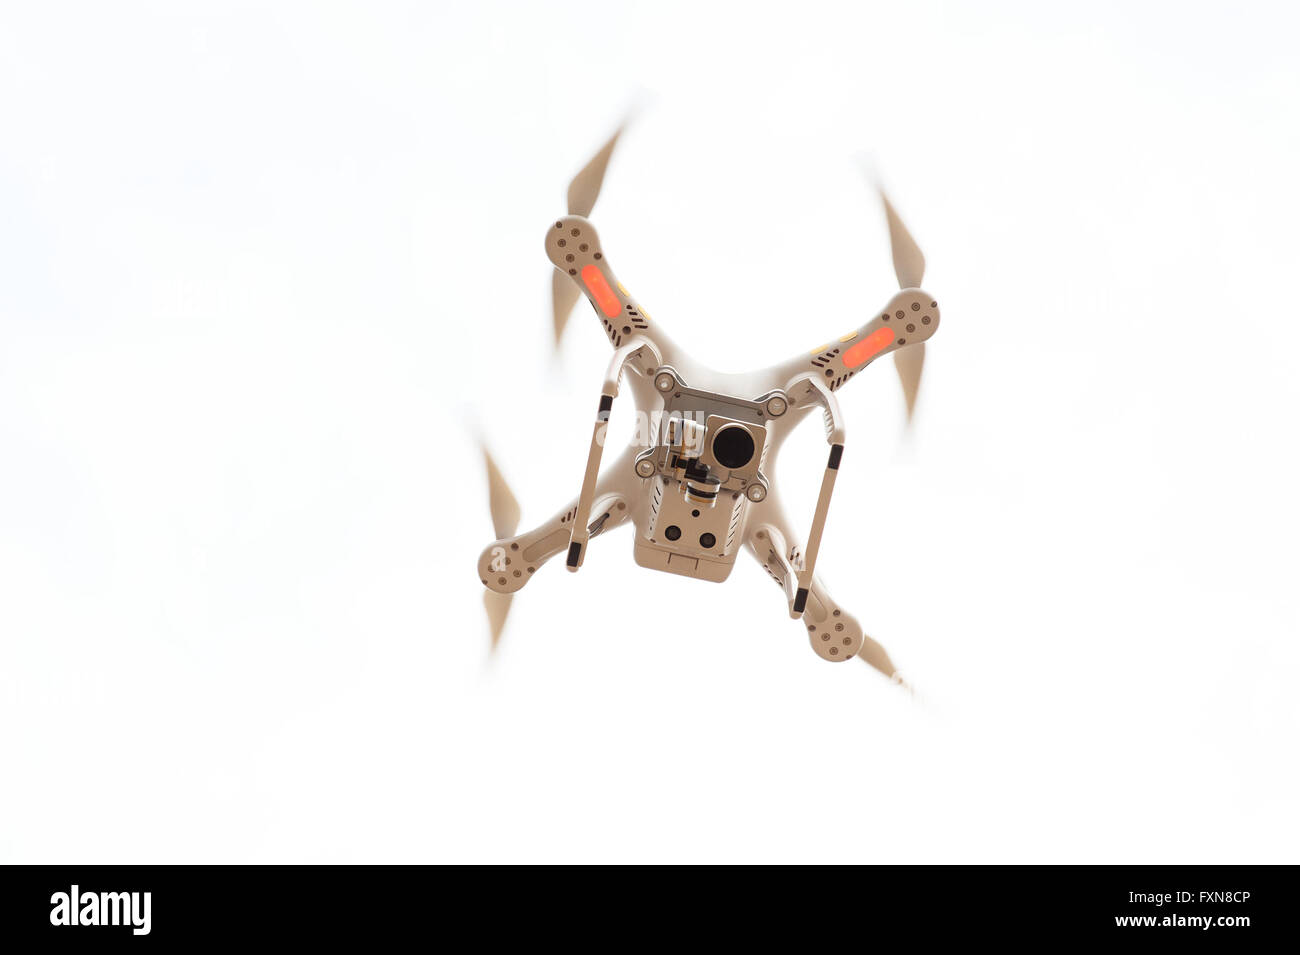 flying drone quadrocopter on a white background Stock Photo